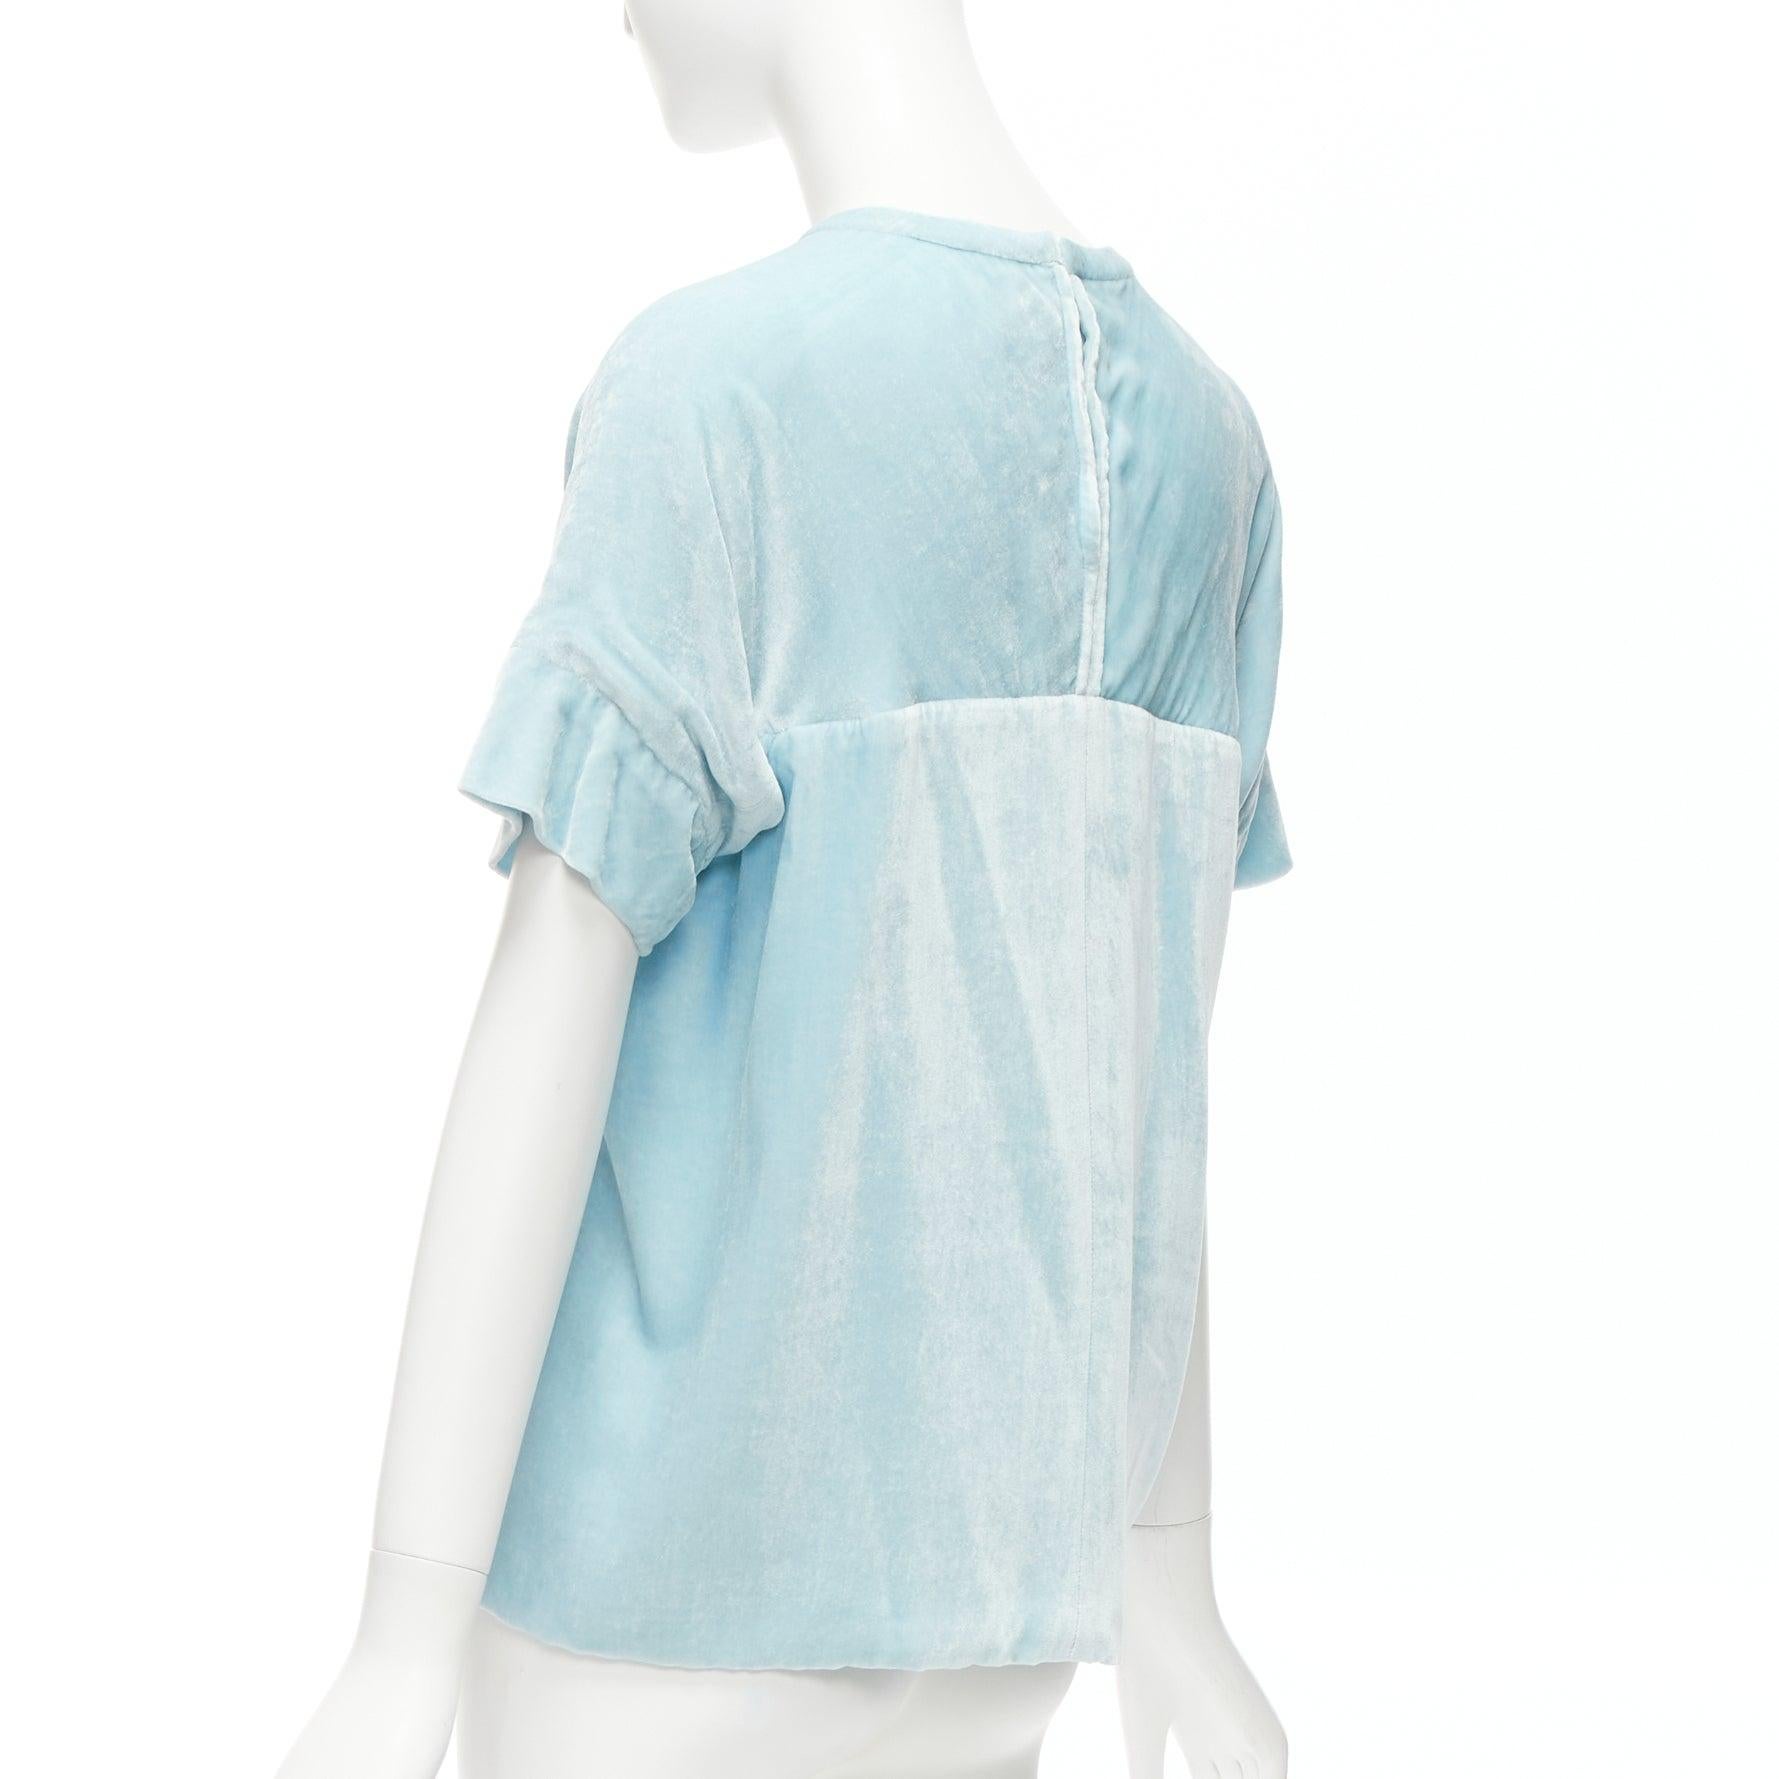 MARC JACOBS powder blue rayon silk velvet darted short sleeve top US2 S
Reference: NKLL/A00145
Brand: Marc Jacobs
Material: Velvet
Color: Blue
Pattern: Solid
Closure: Hook & Eye
Extra Details: Back hook and eye closure
Made in: United